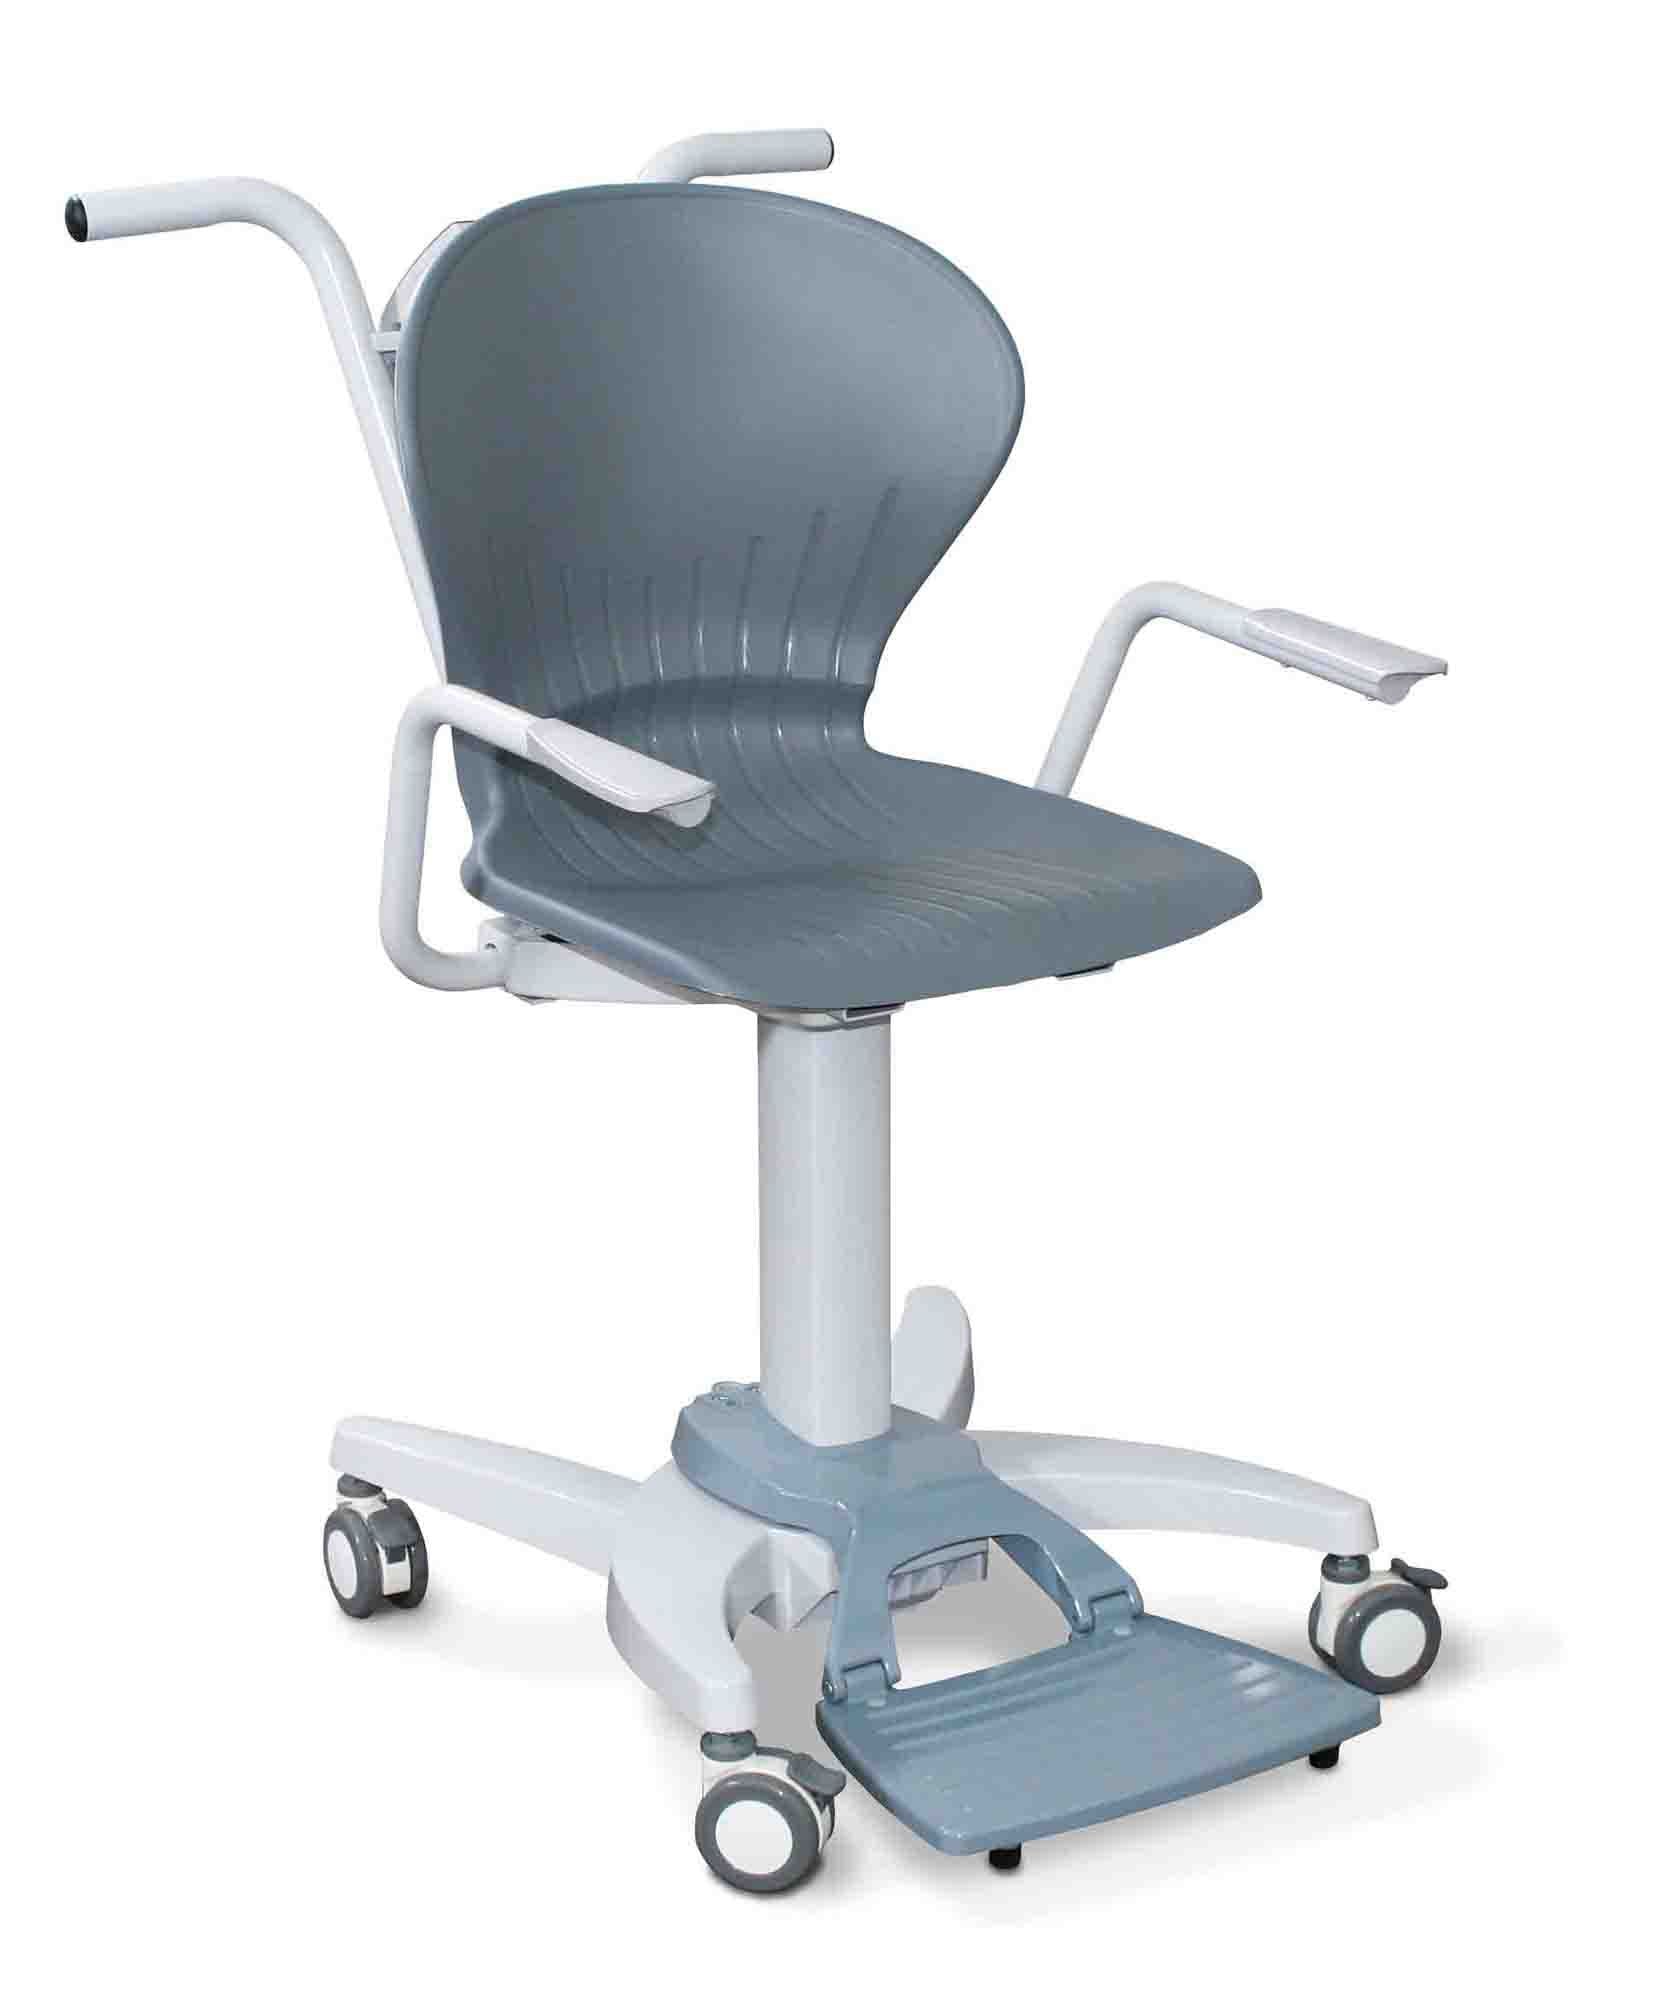 Rice Lake 119114 660lb x 0.2lb, 550-10-1 Digital Chair Scale, Plastic Seat with 2 years Warranty